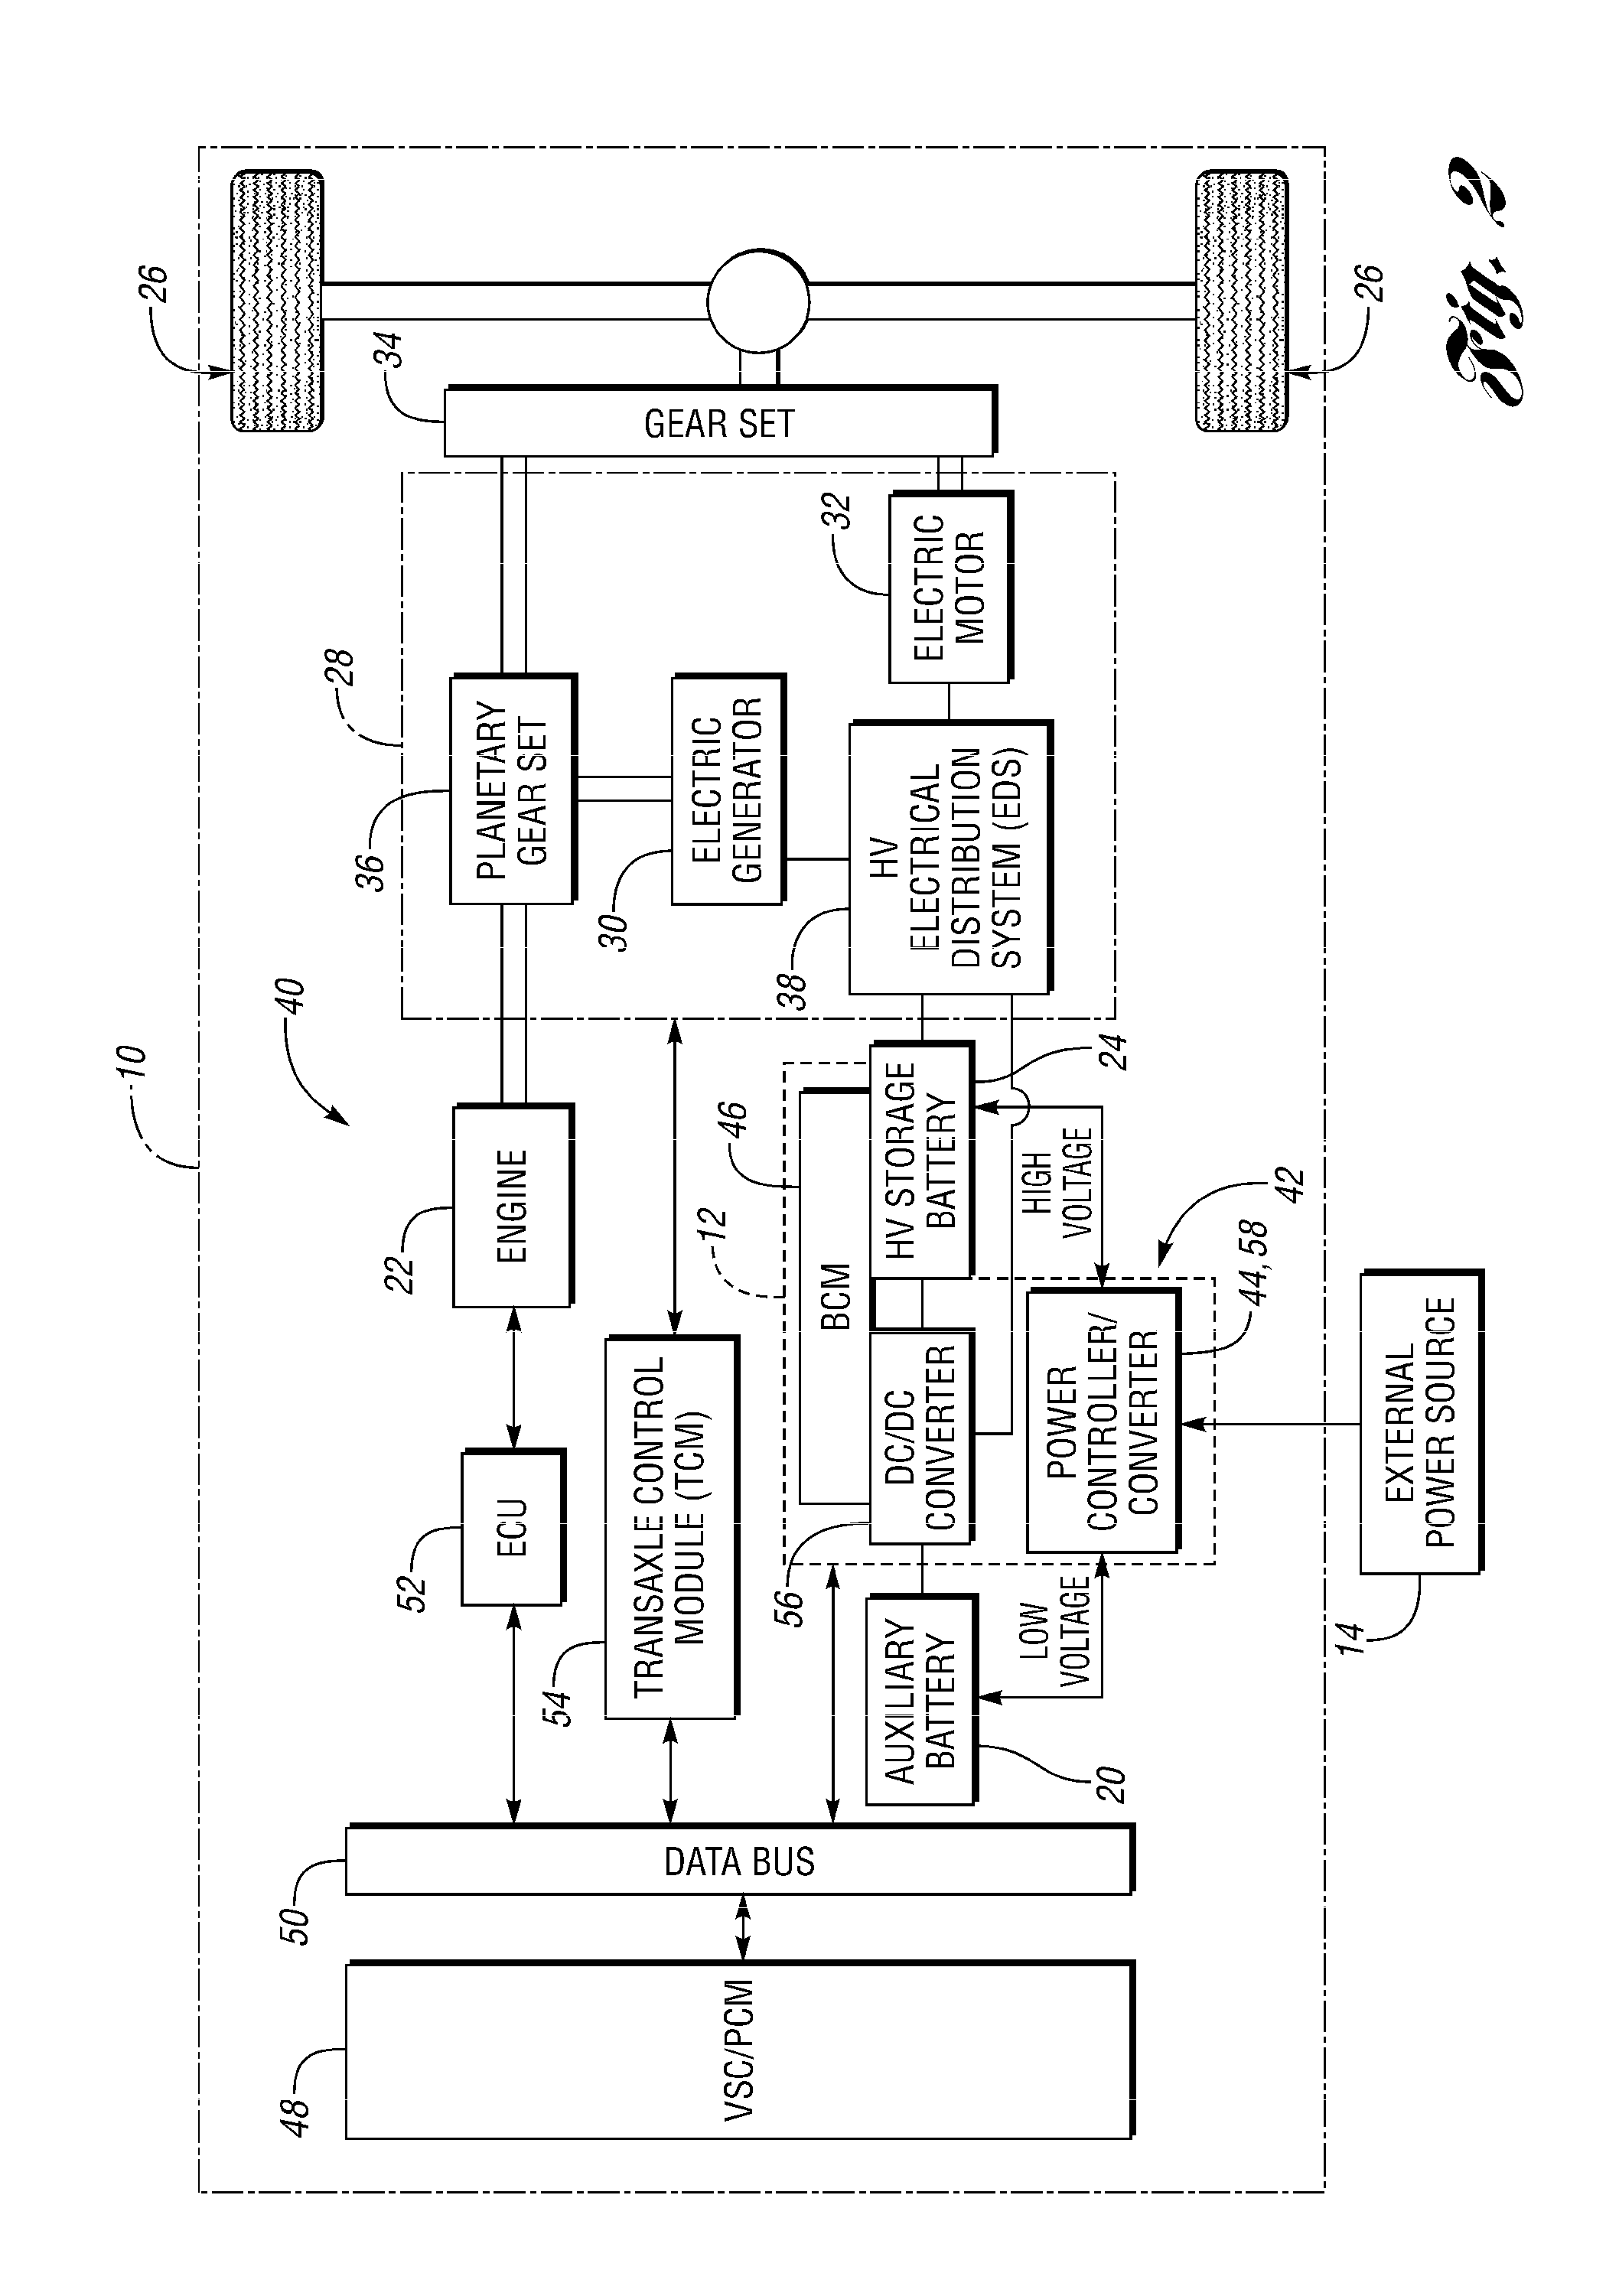 Method and system for charging an auxilary battery in a plug-in electric vehicle